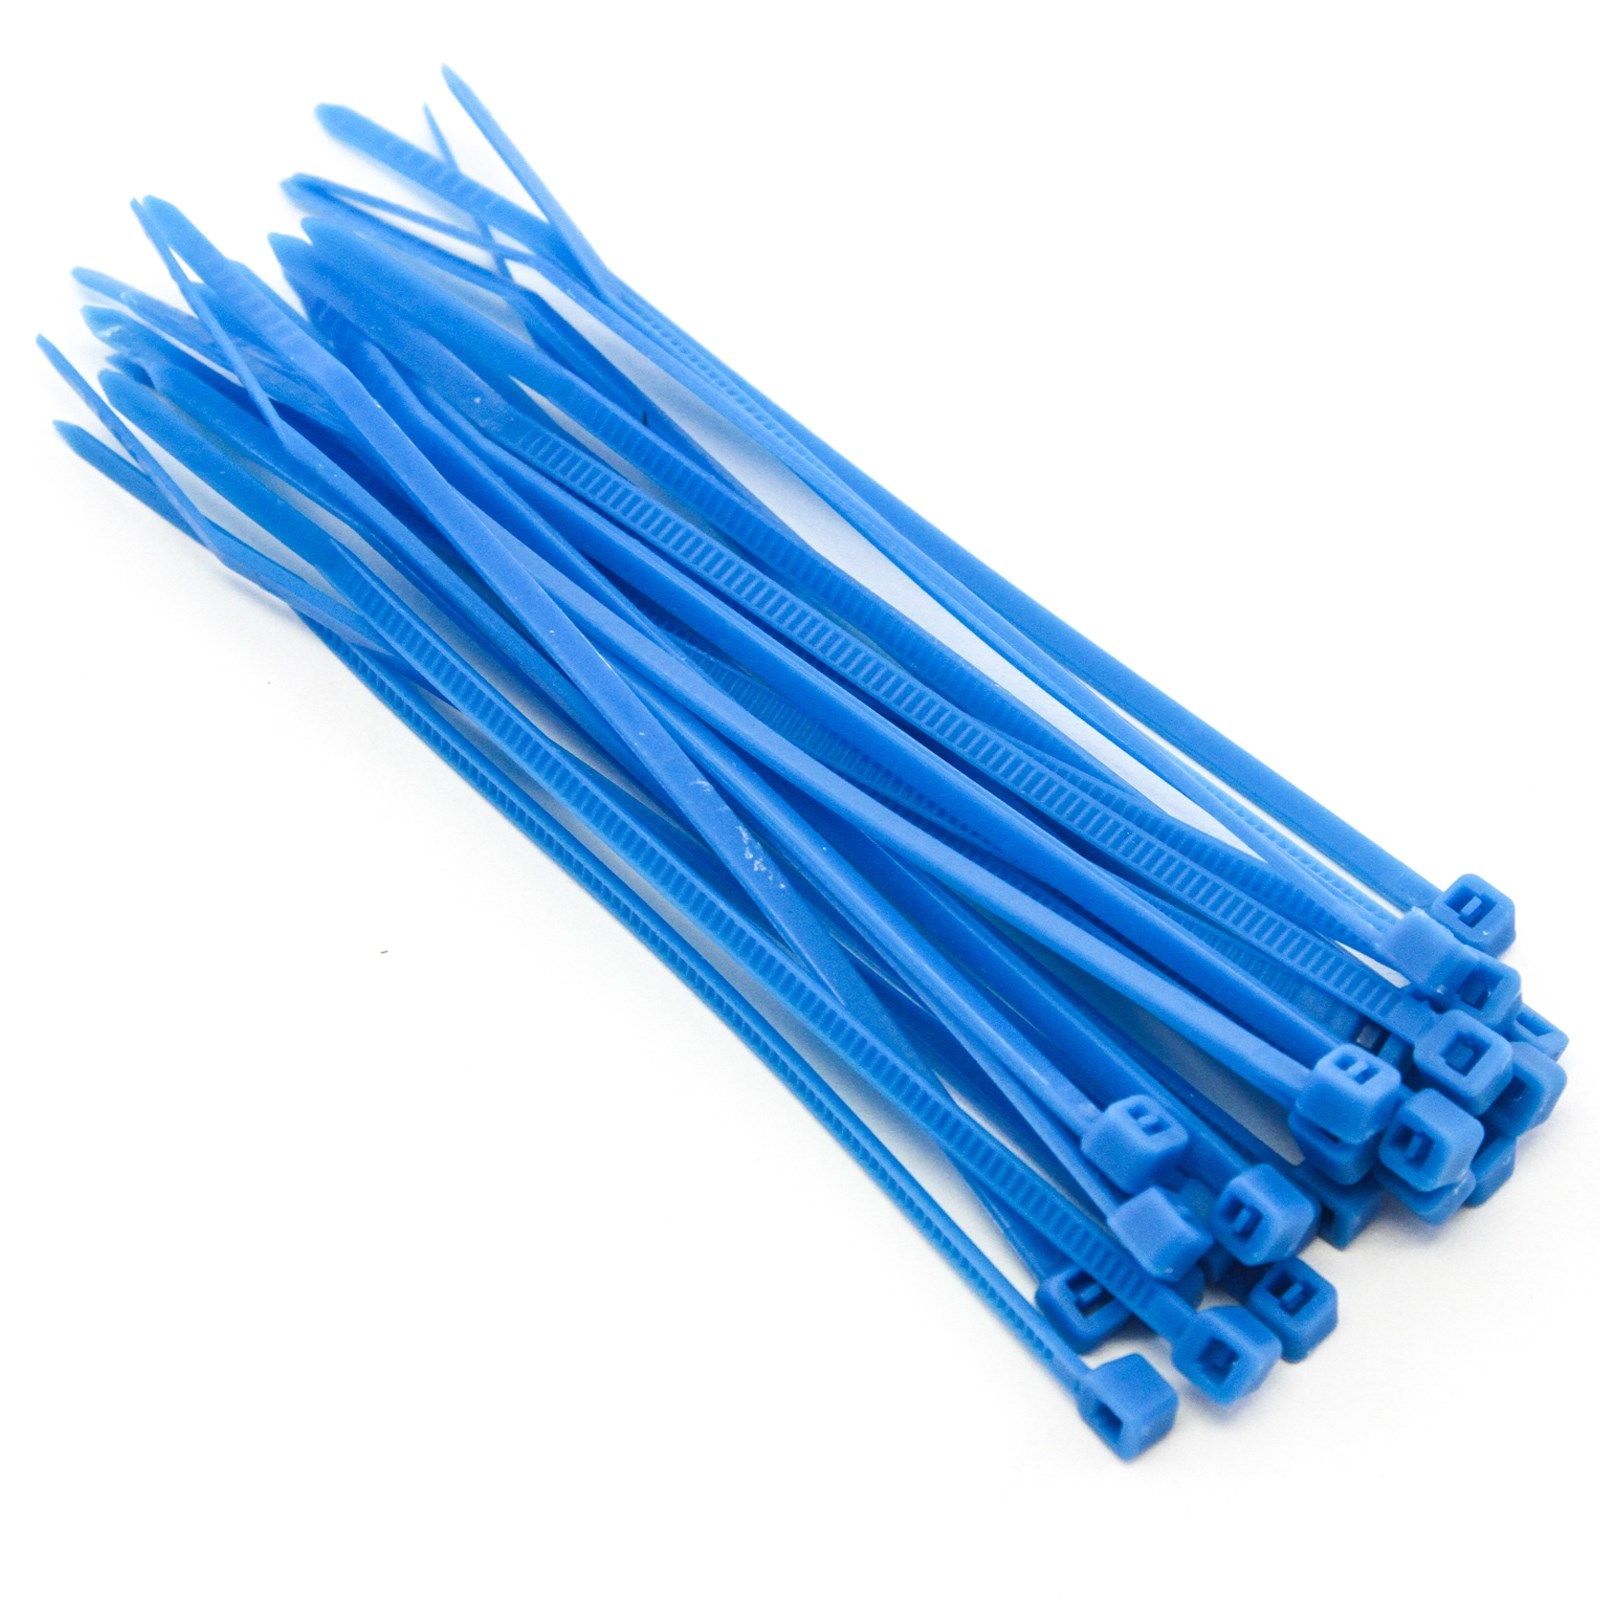 25 Heavy Duty 4 Inches 18 Pound Zip Cable Ties Nylon Wrap Blue